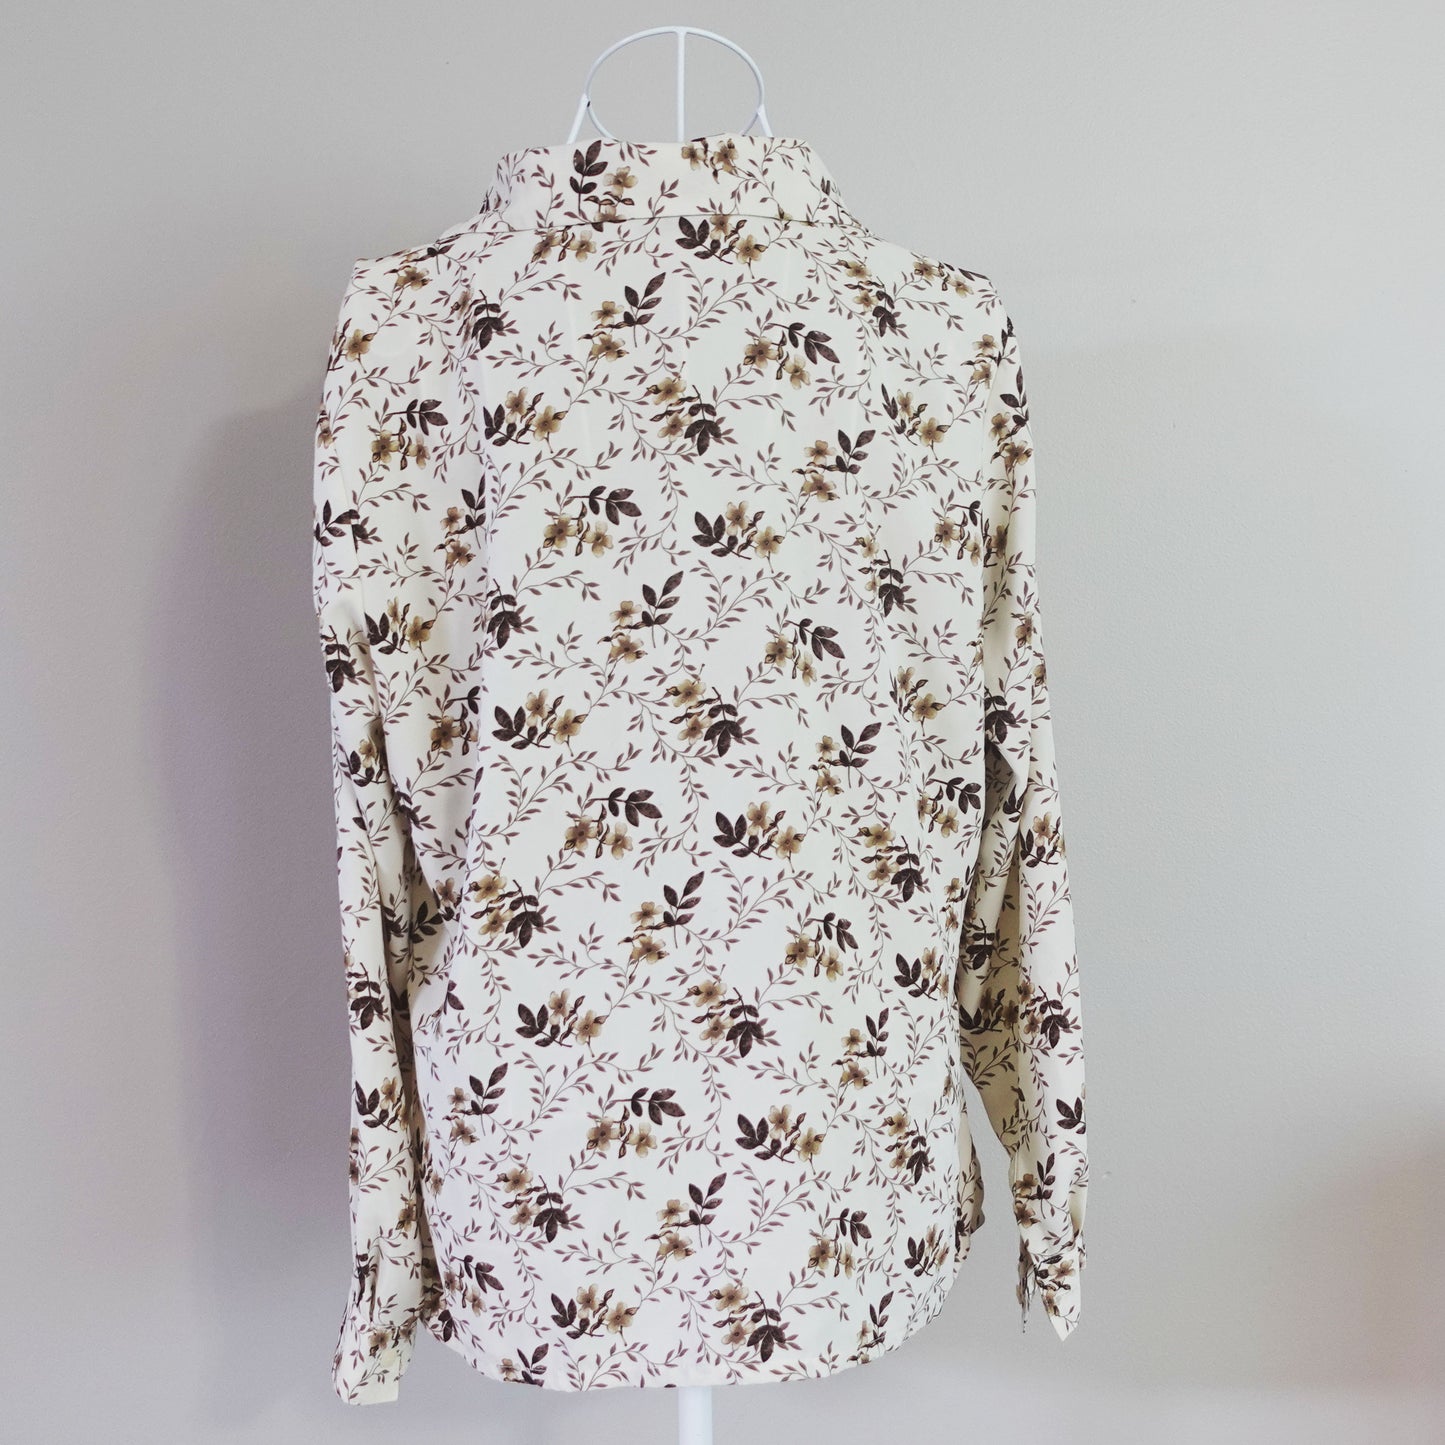 ivory floral button down top